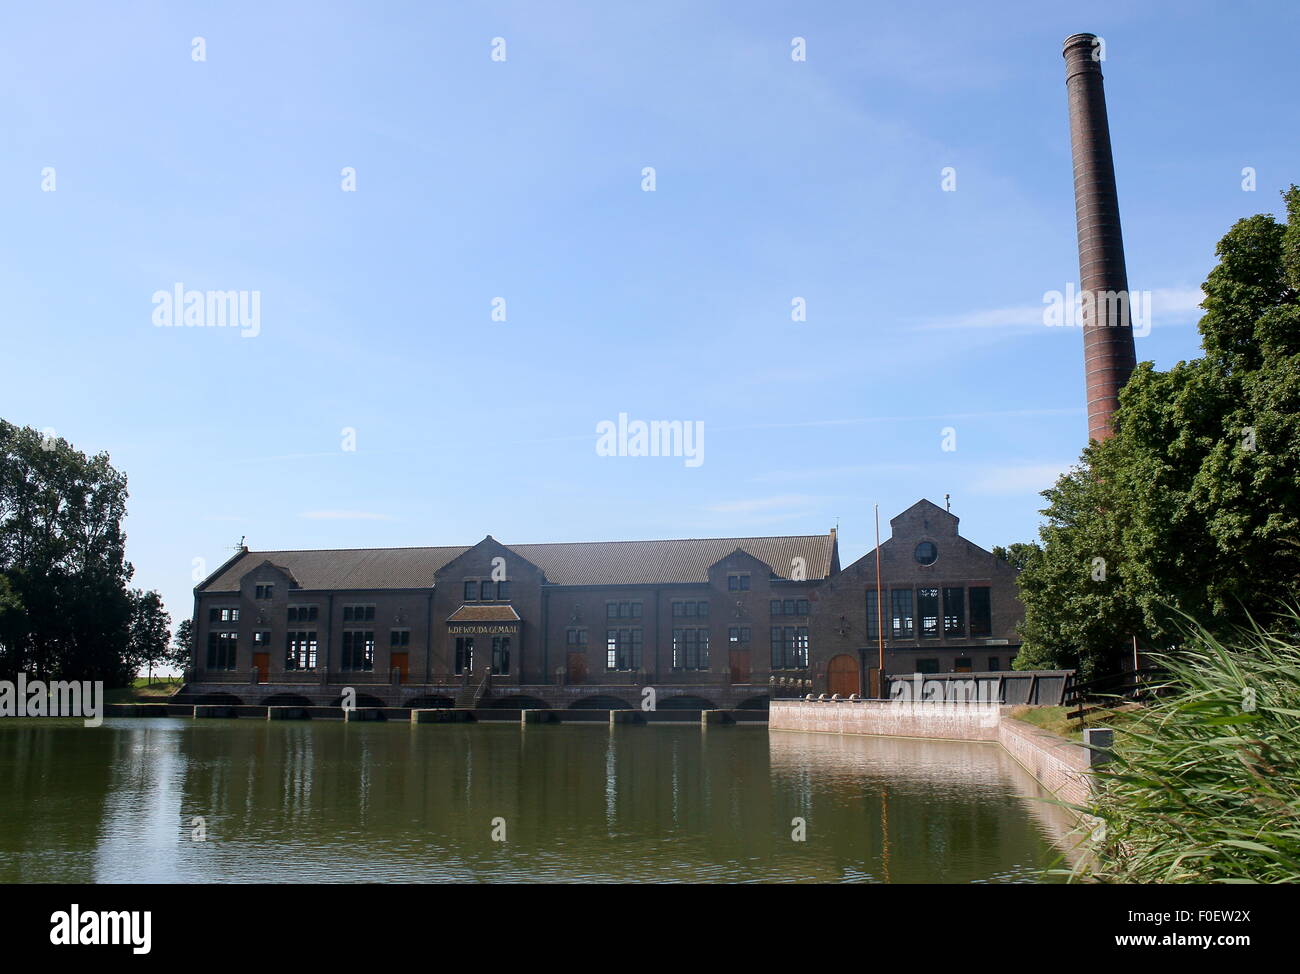 DF Woudagemaal,  largest operational steam-powered pumping station in the world at Lemmer, Netherlands, UNESCO World Heritage Stock Photo